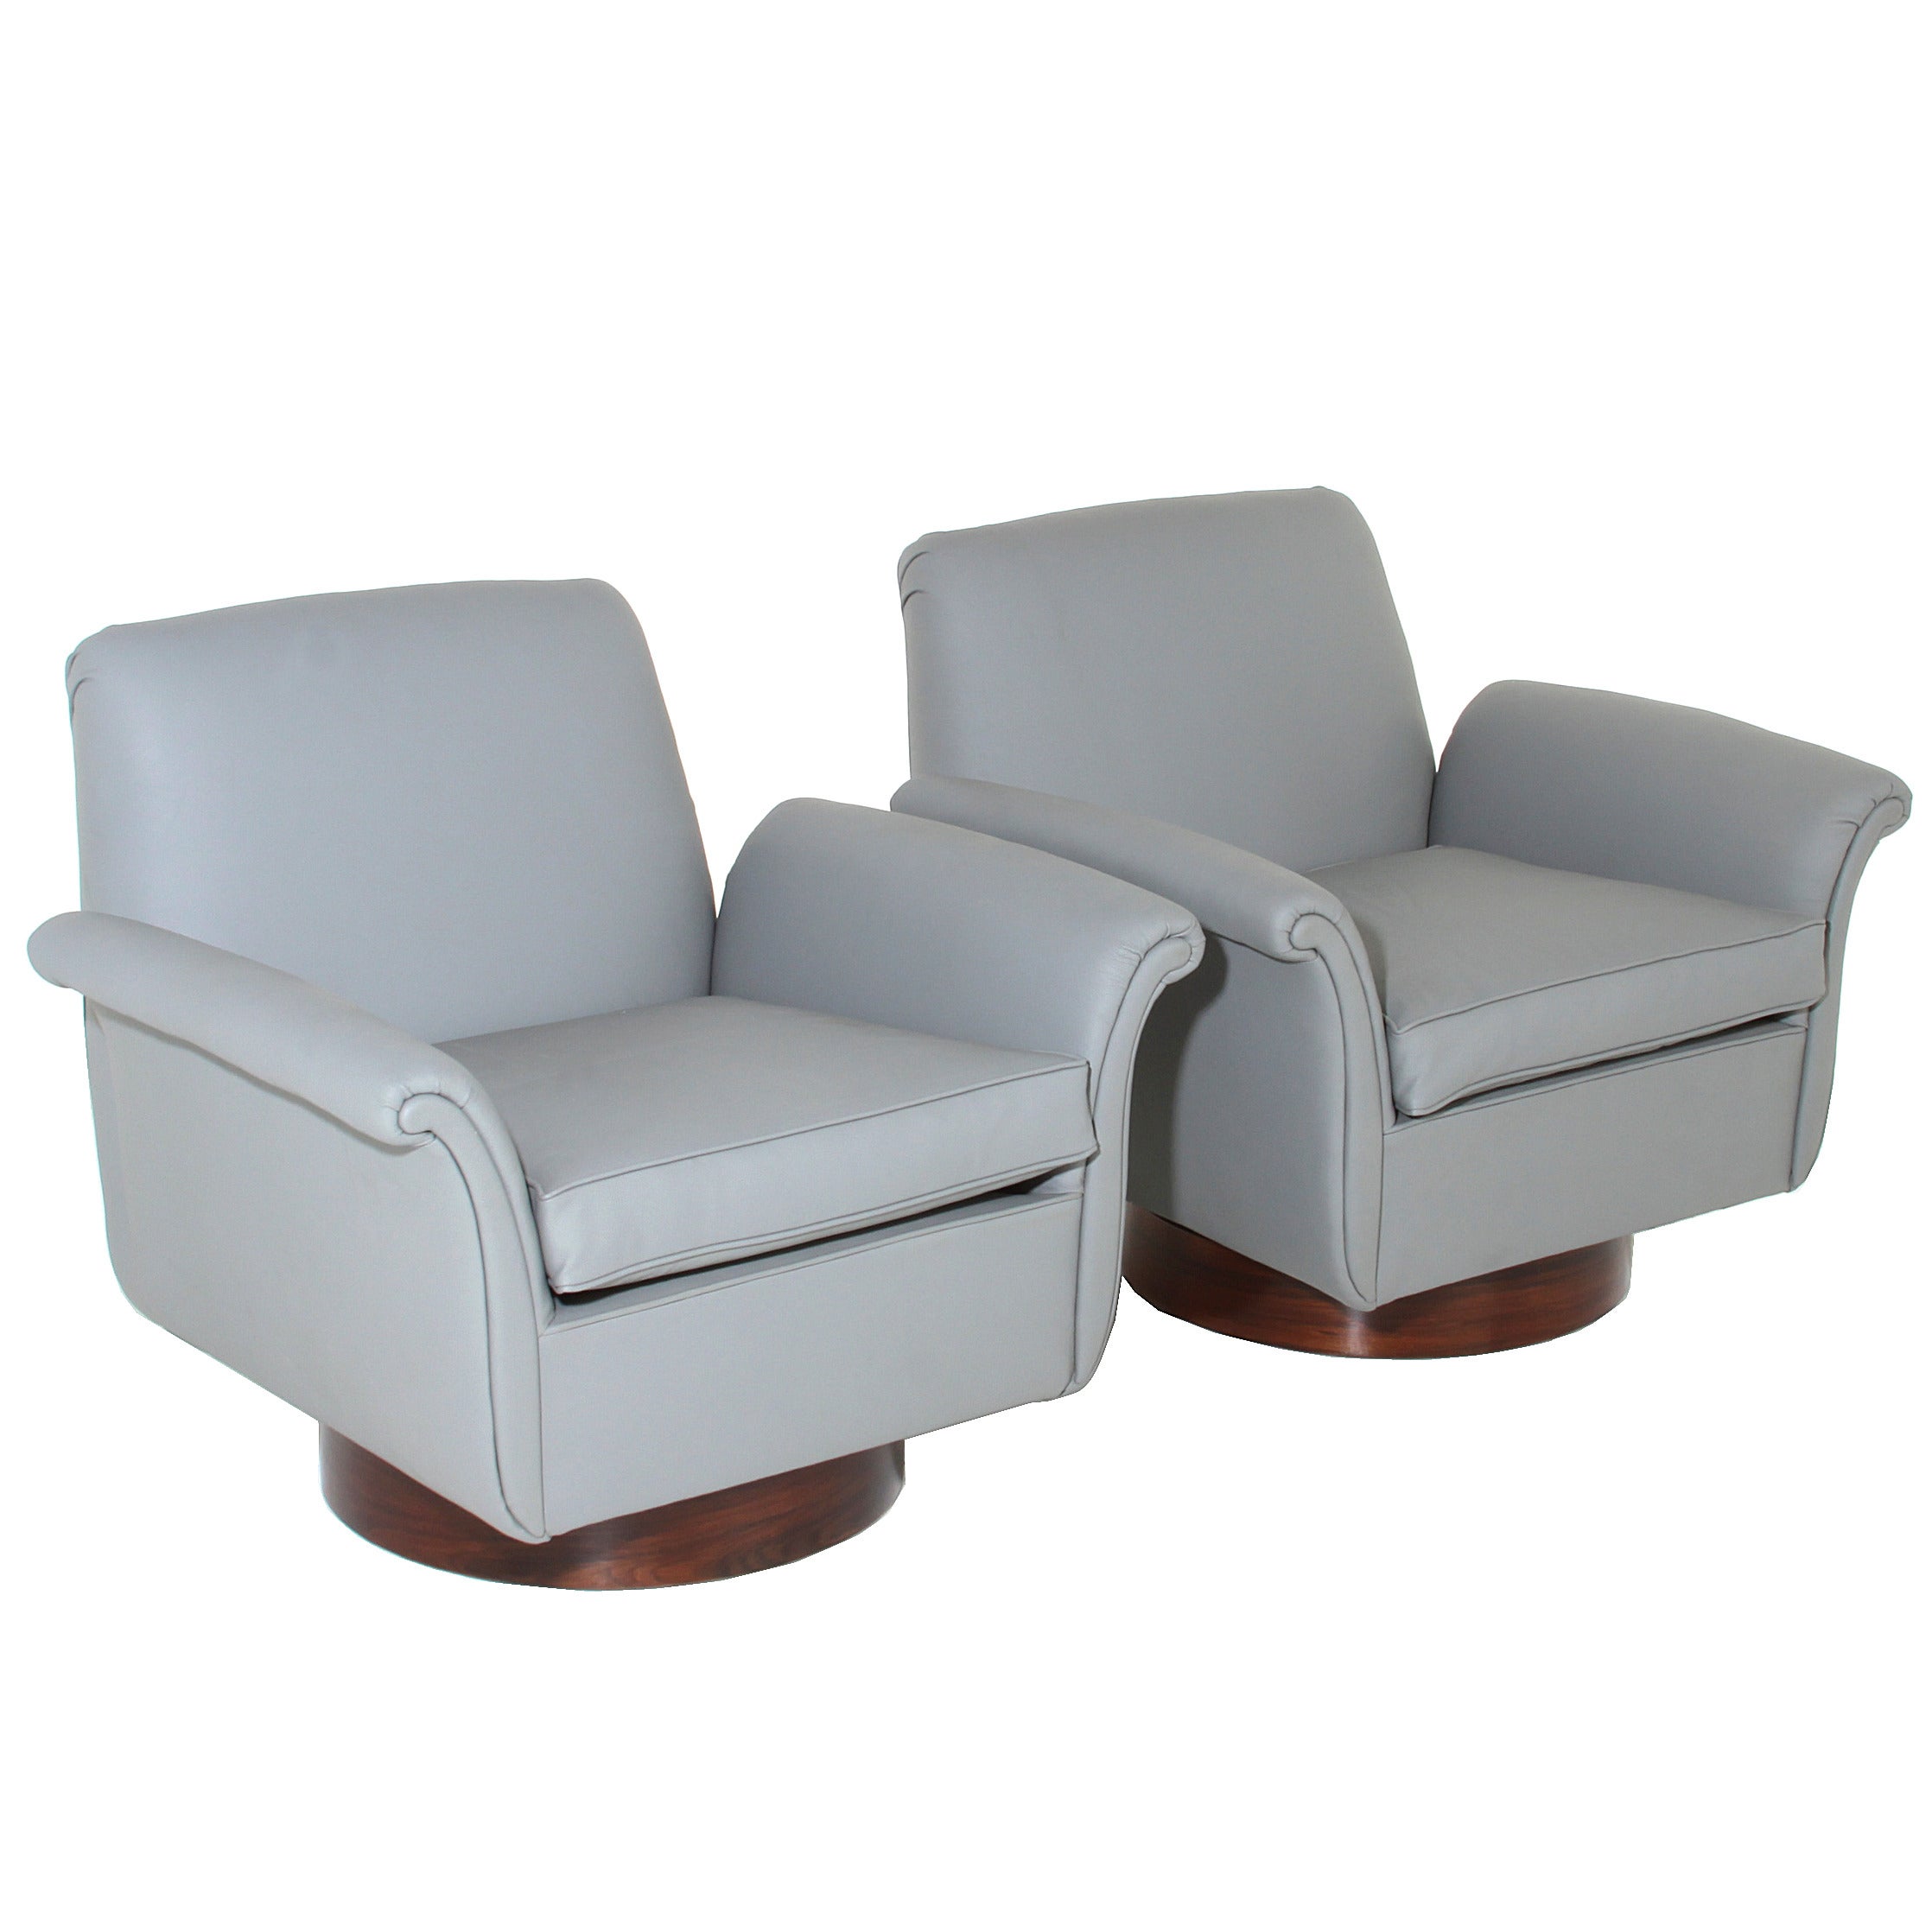 Pair of Brazilian Armchairs with Curved Arms and Cylindrical Bases